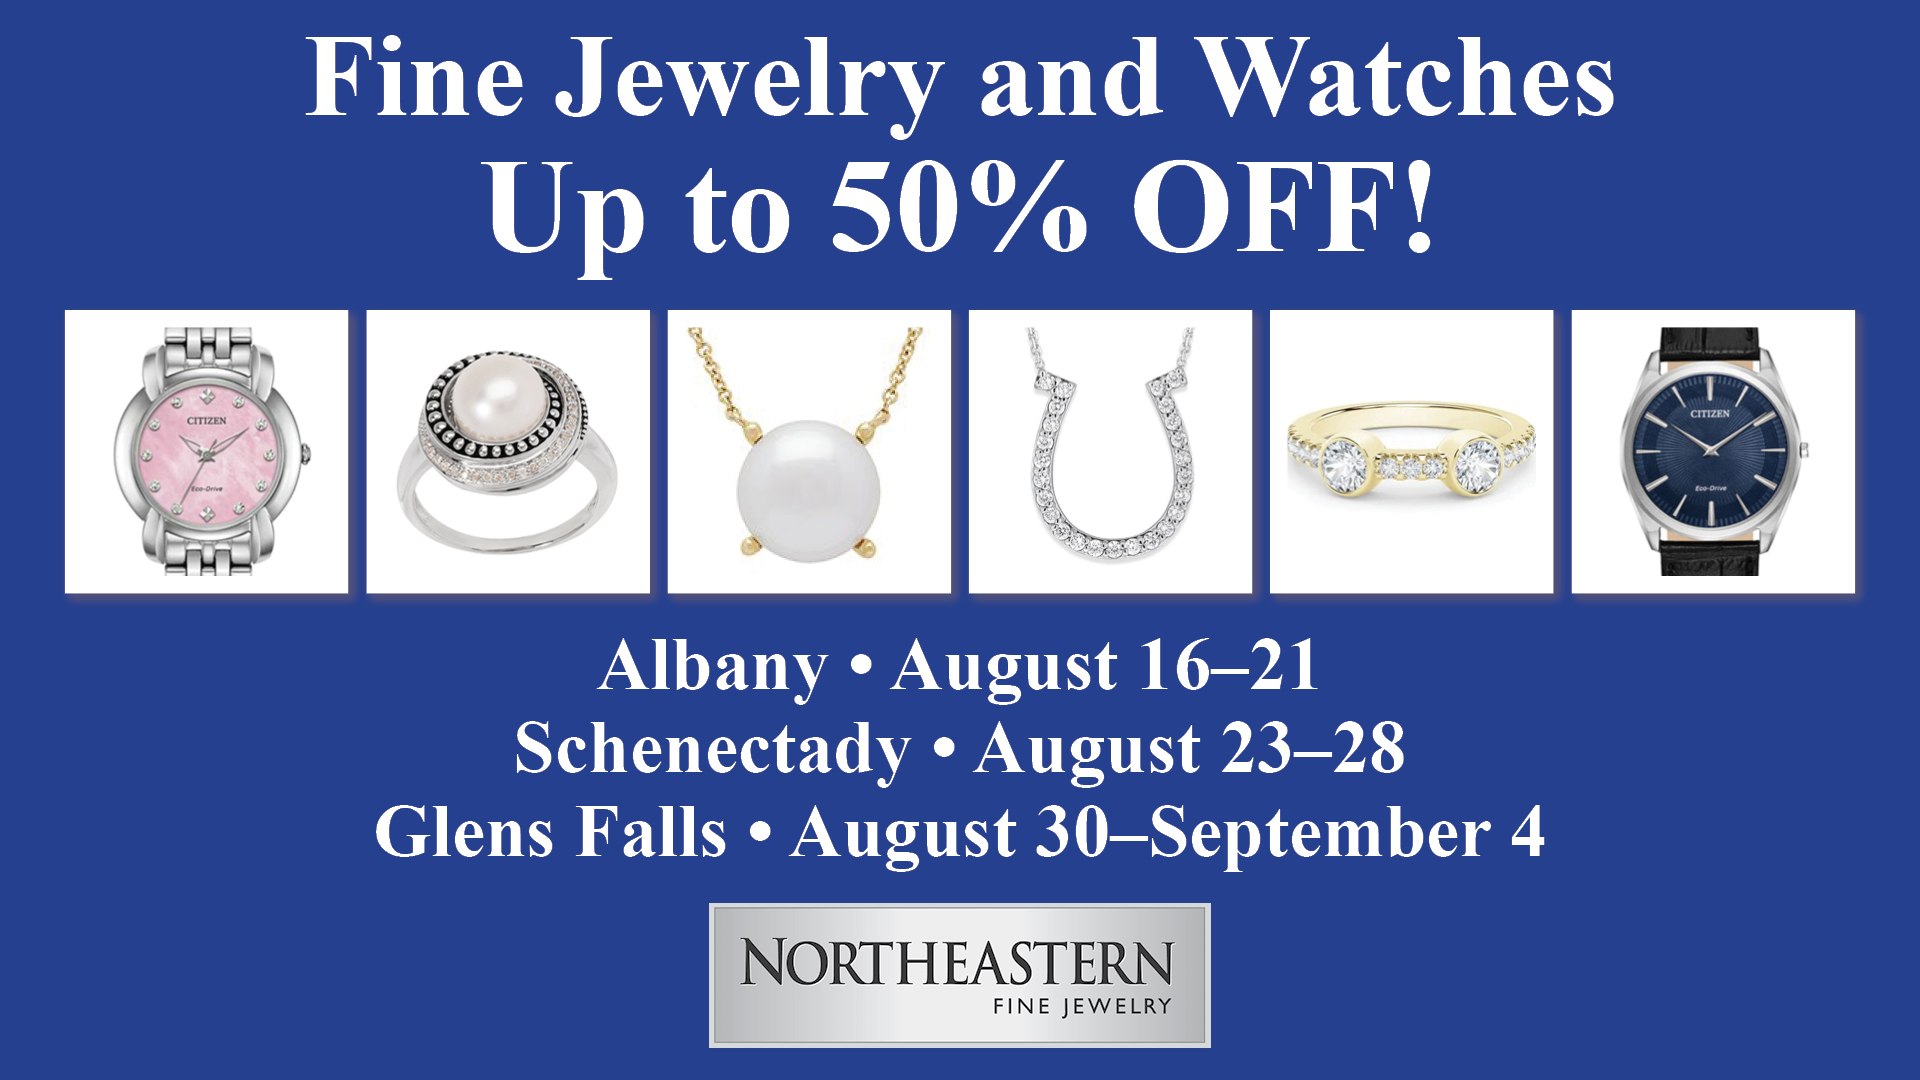 Northeastern Fine Jewelry Announces An End of the Season Summer Sale